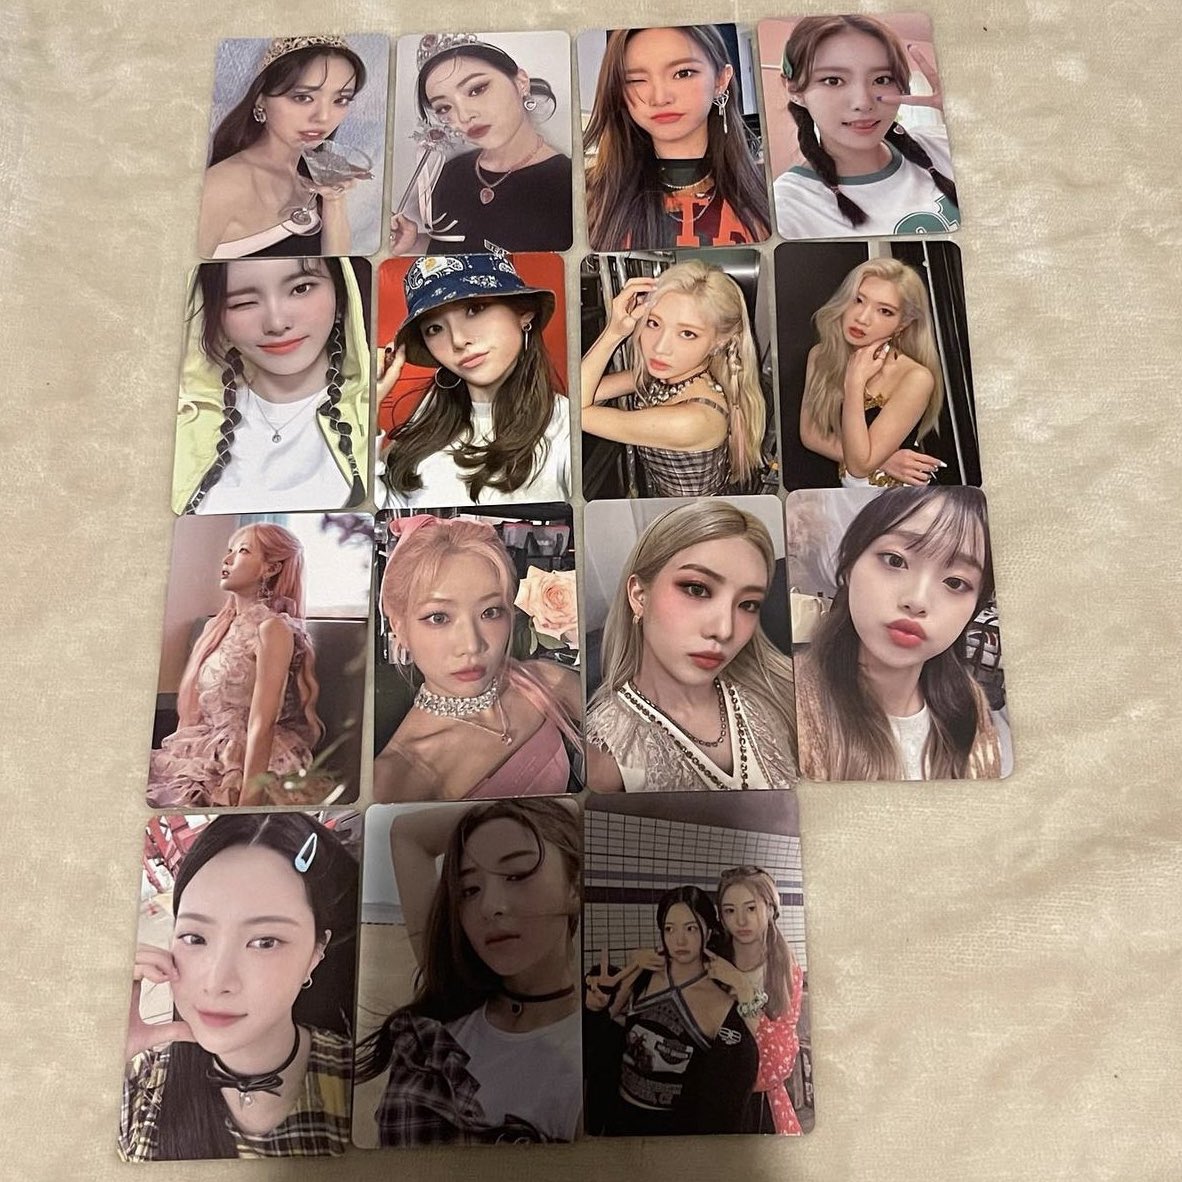 does anyone wanna buy any of these off me?? i have no place for them
anymore and want them to be rehomed, uk buyers with bank accounts would be preferred but can work things out :,) pls rt and help me rehome these pcs and reply for any prices as not enough to list individual!!<33